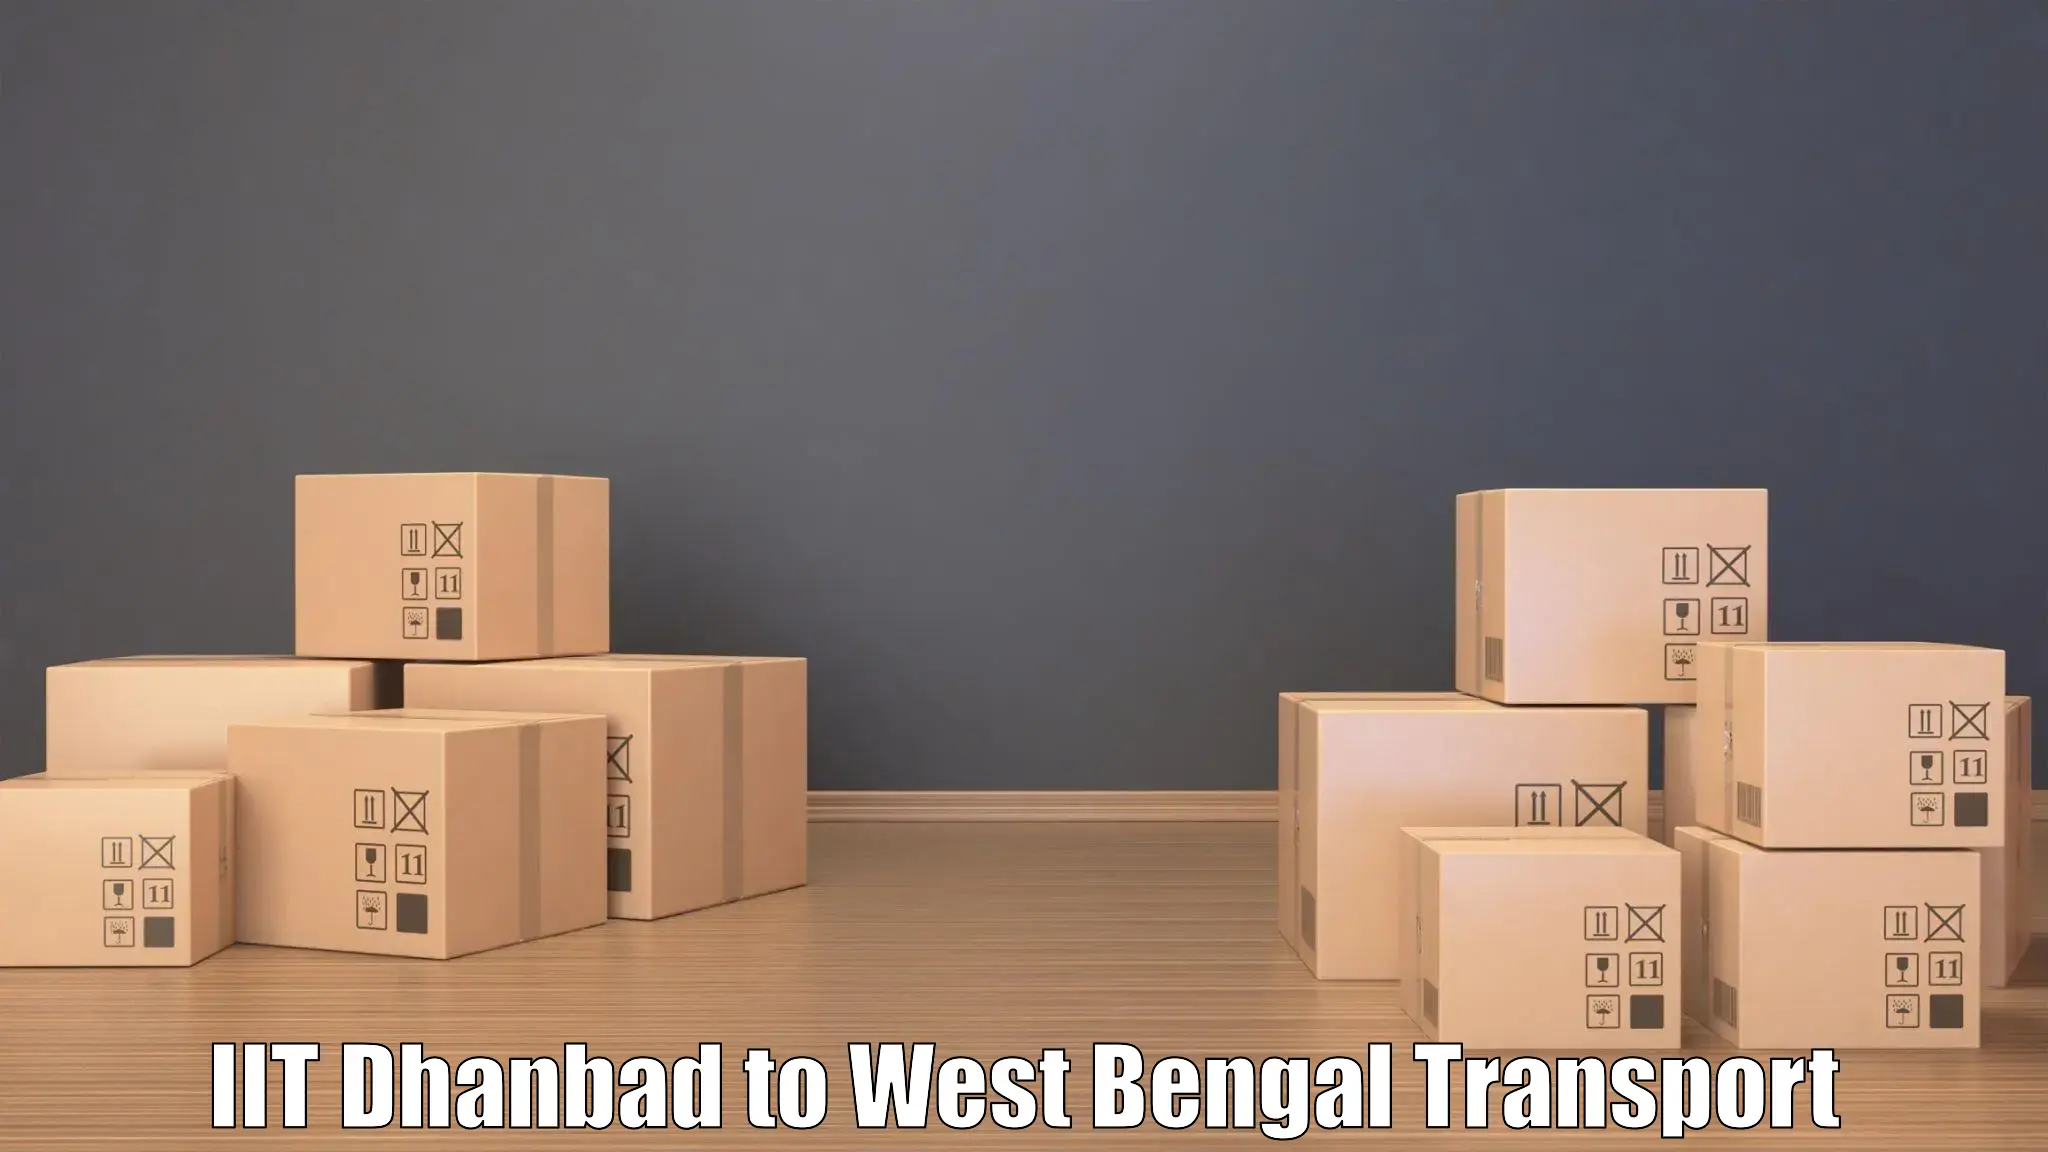 Commercial transport service IIT Dhanbad to Mirzapur Bardhaman